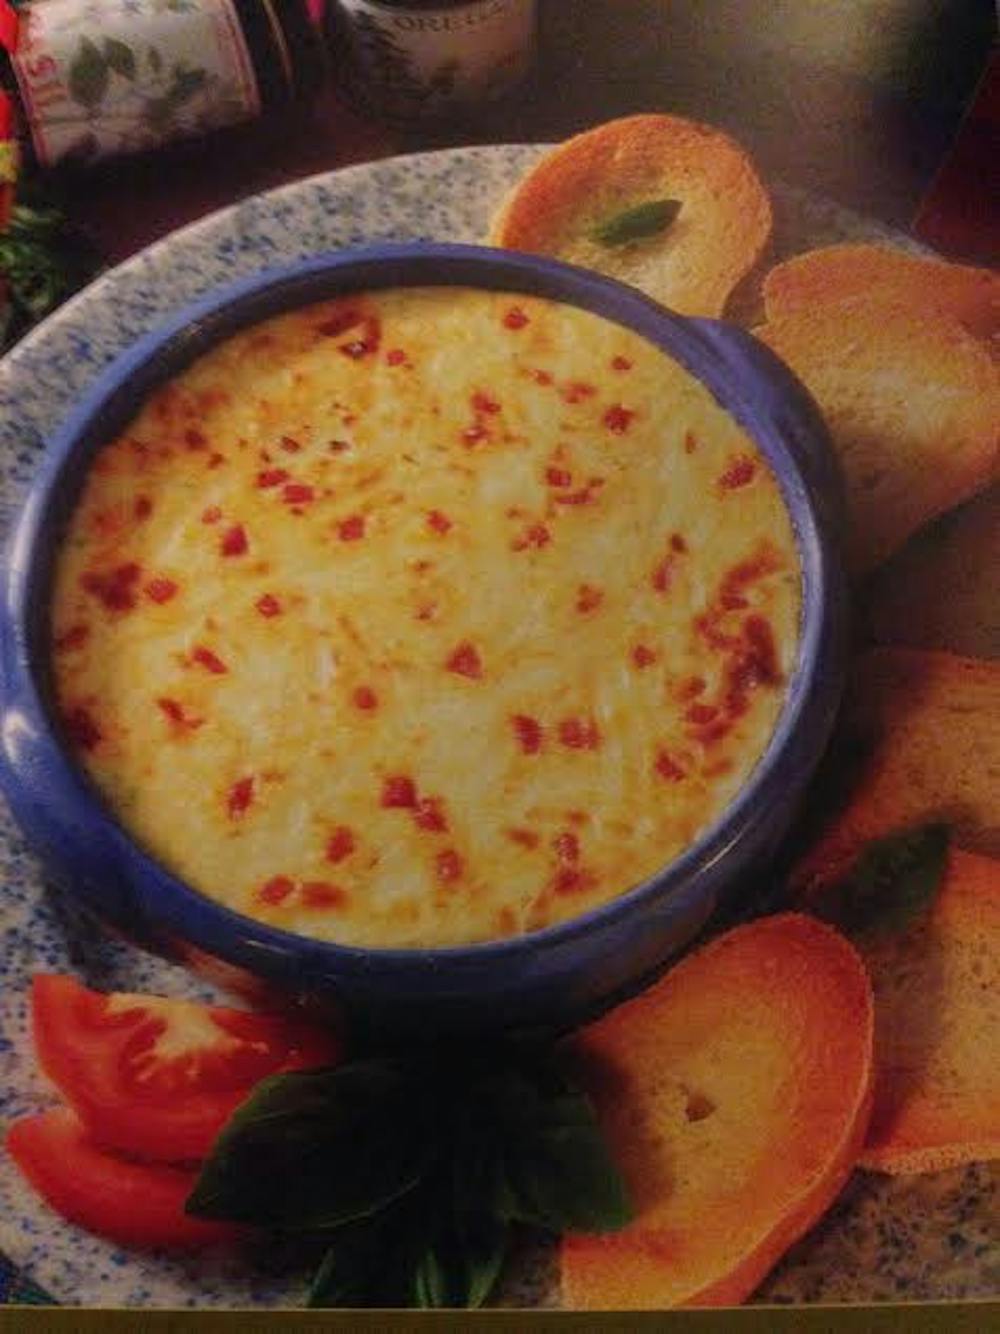 Recipe of the Week: White Pizza Dip